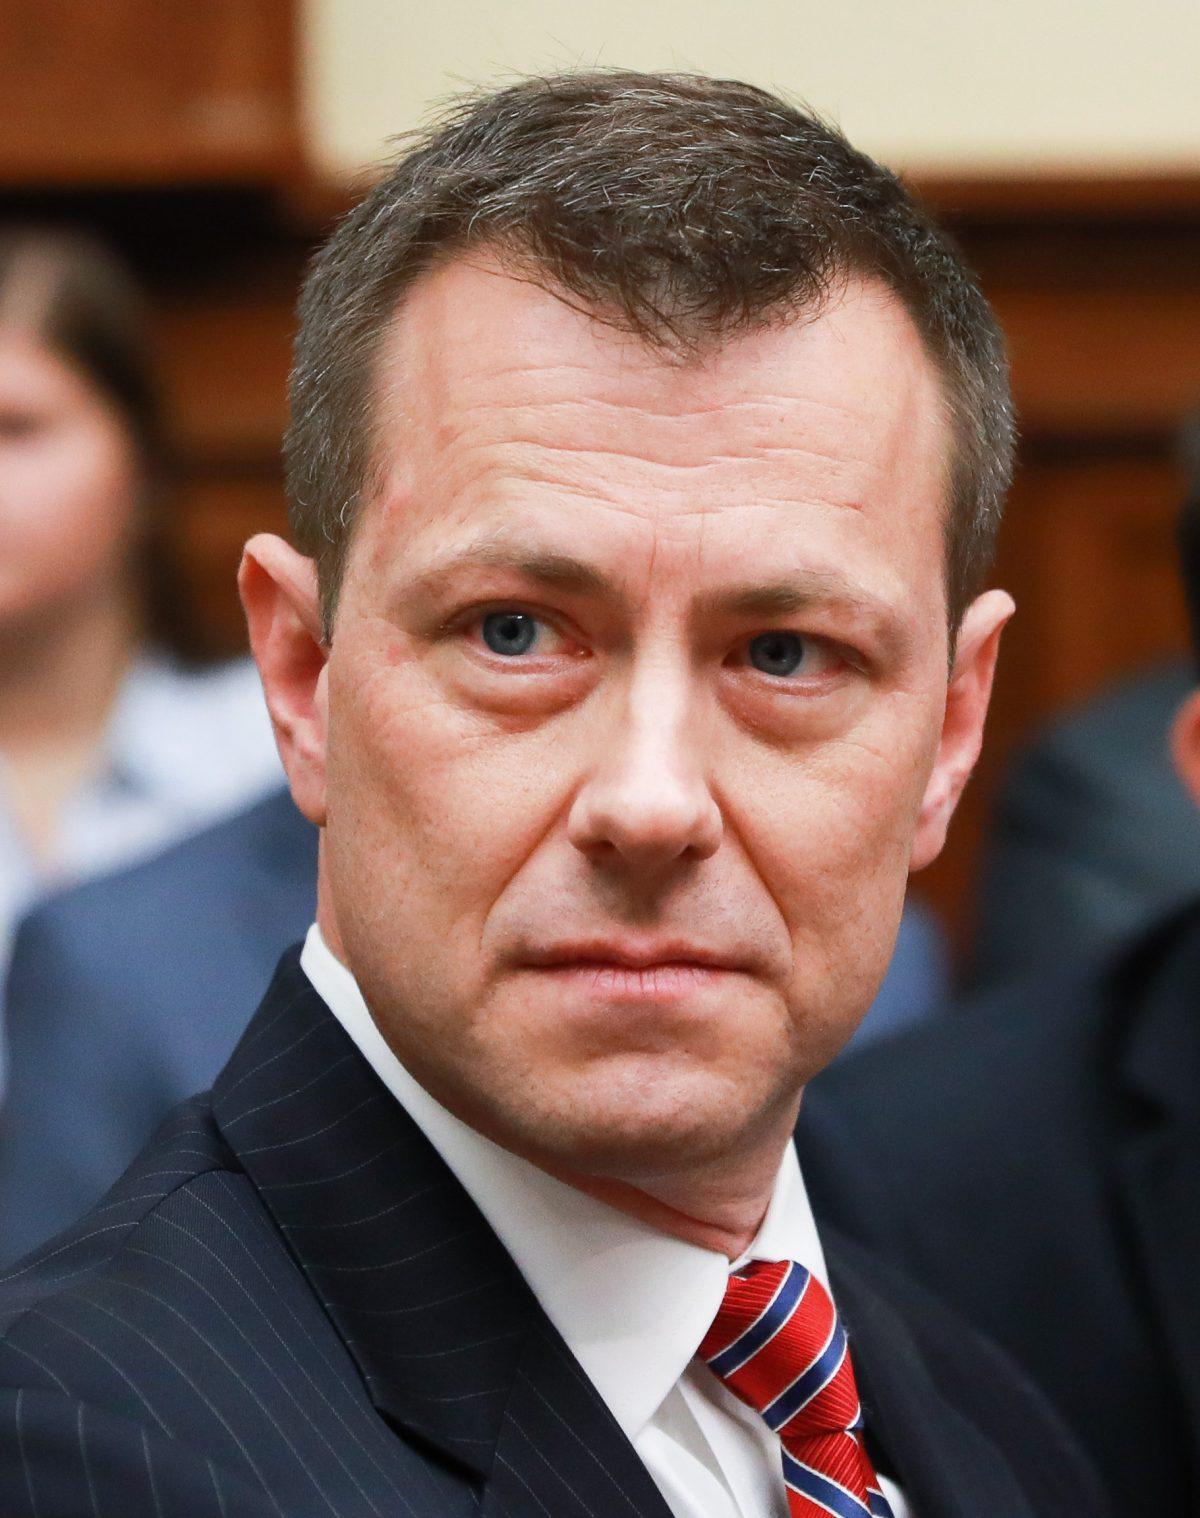 Then-FBI Deputy Assistant Director Peter Strzok on July 12, 2018. Strzok oversaw both the FBI's investigation into Hillary Clinton's use of a private email server and the counterintelligence investigation into Donald Trump's campaign. (Samira Bouaou/The Epoch Times)